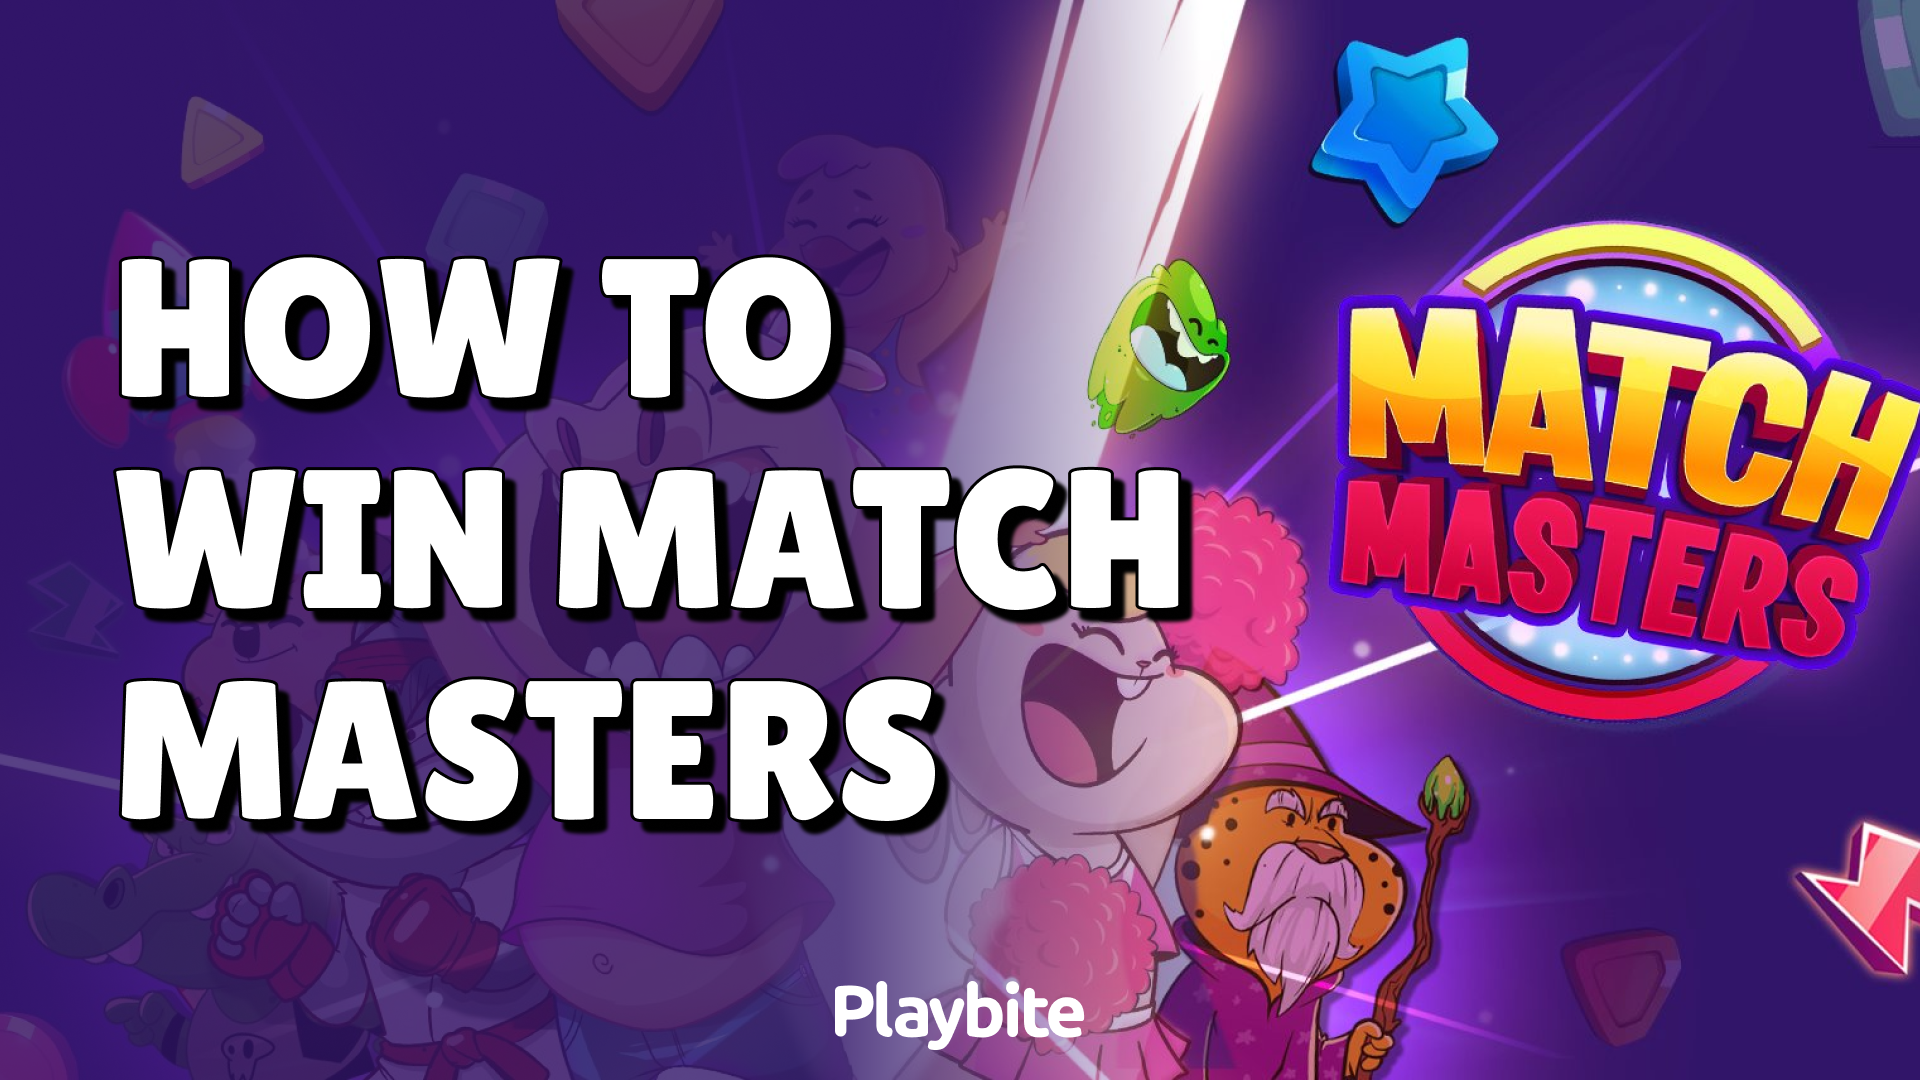 How To Win Match Masters